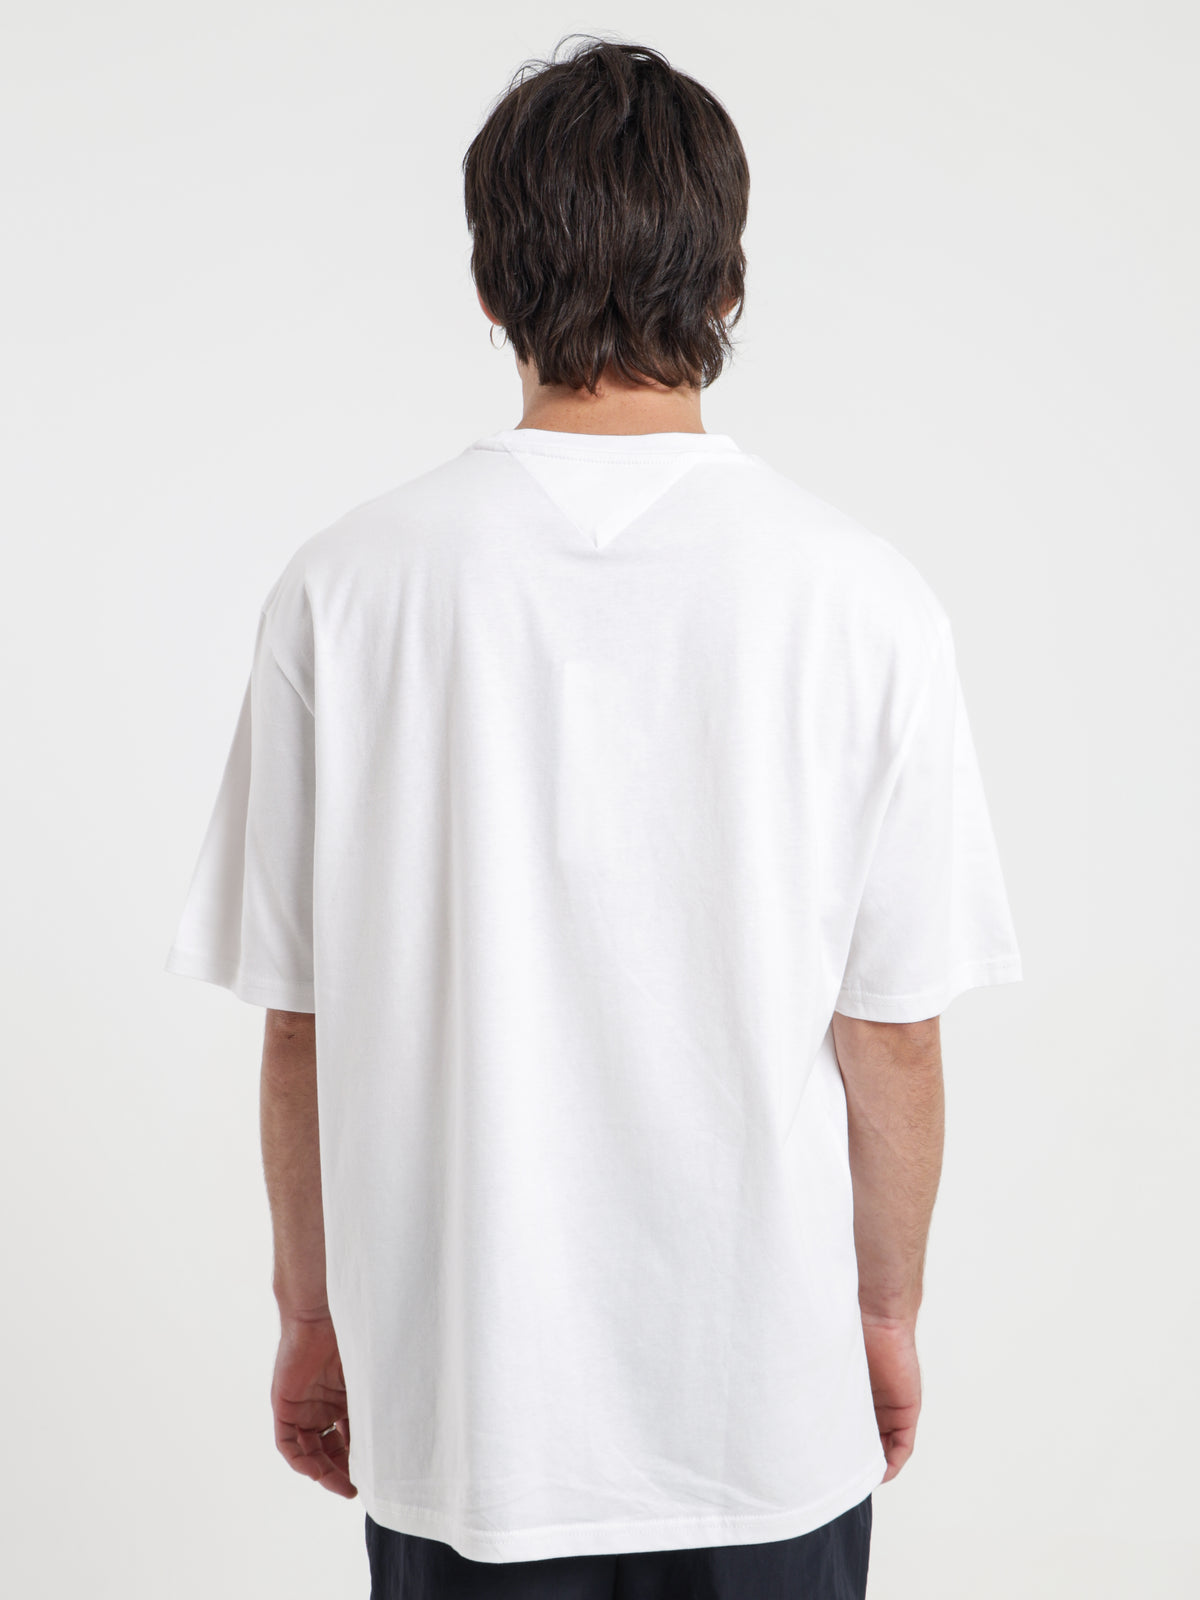 Essential Crew Neck Skate T-Shirt in White